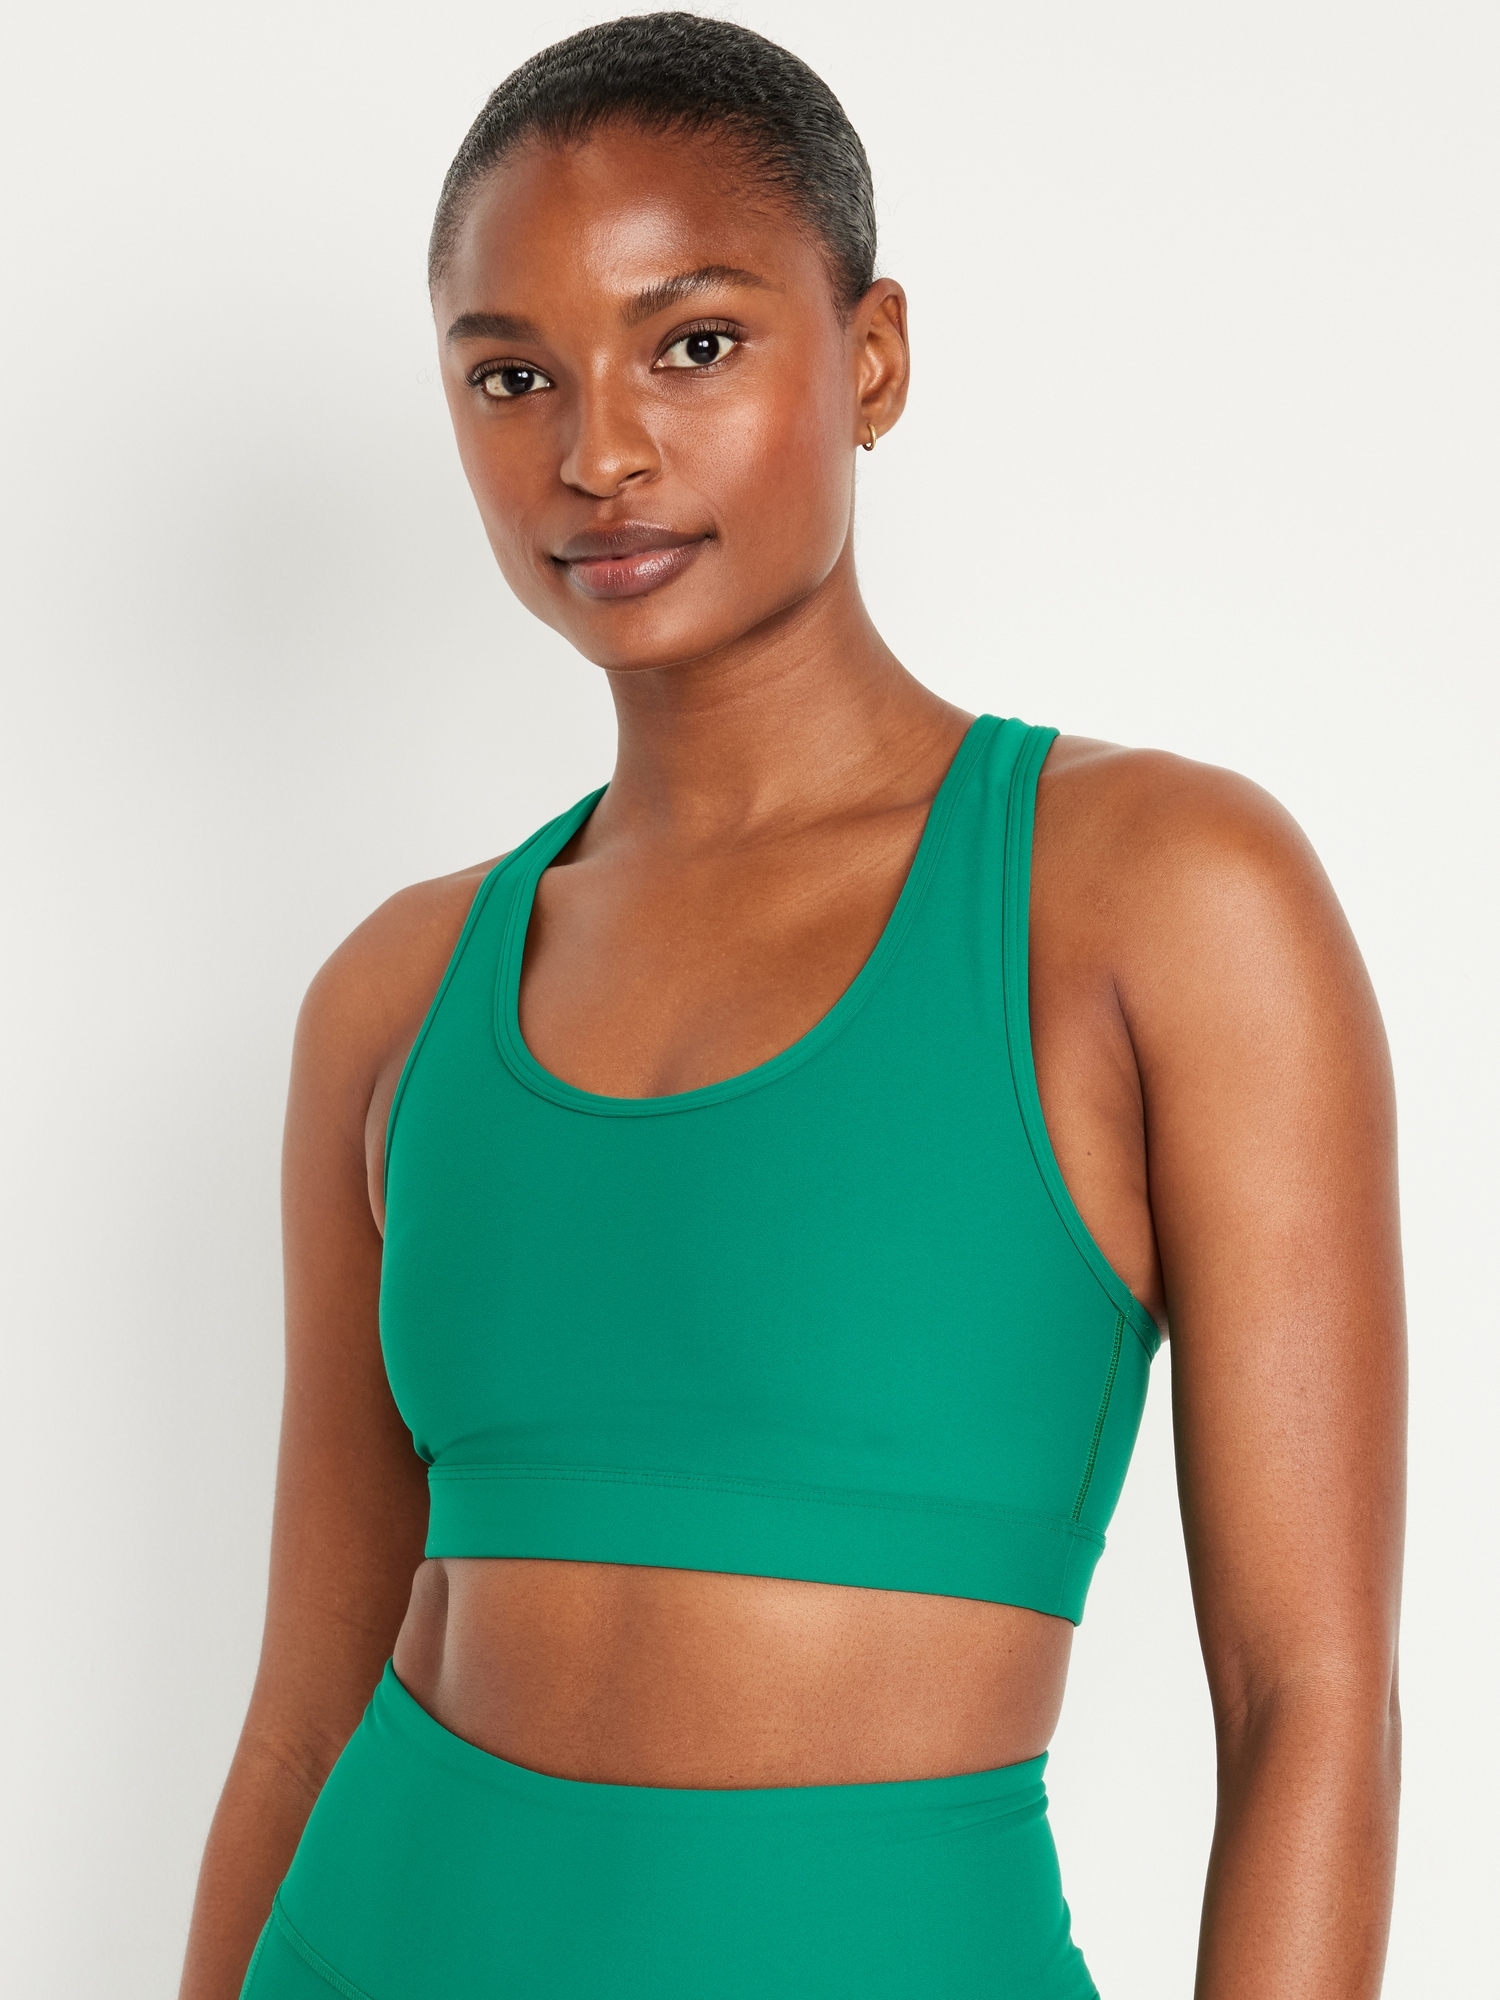 Old Navy High Support Racerback Sports Bra 2X-4X